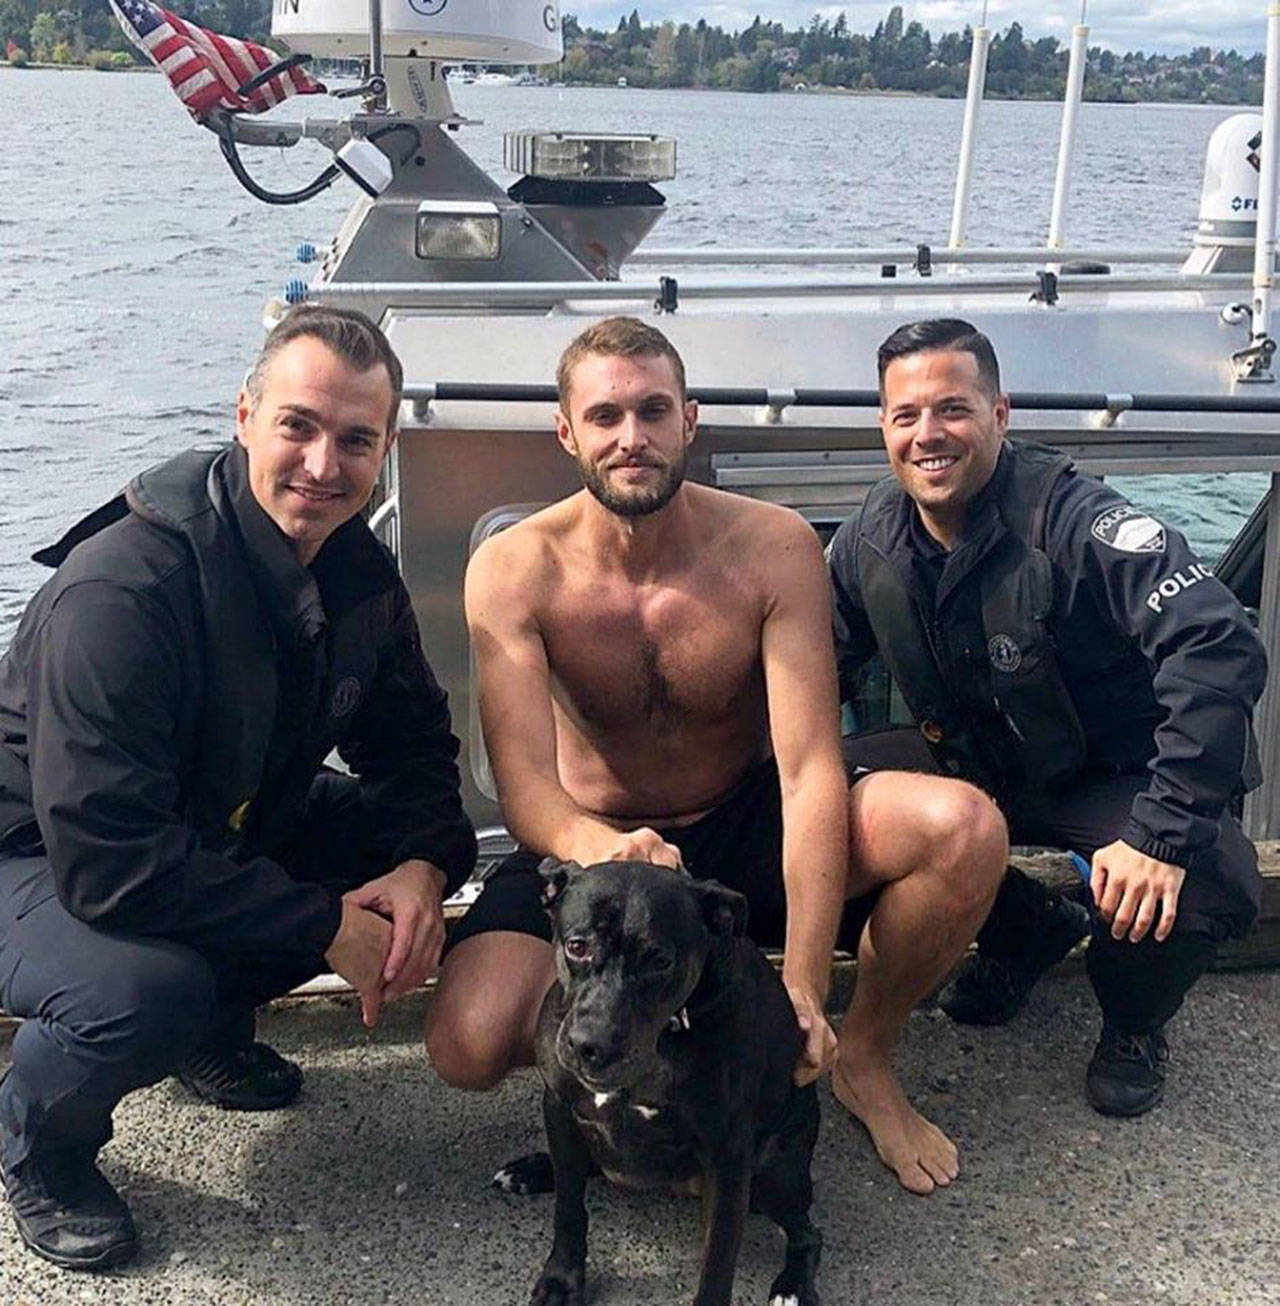 Detective Bobby Jira (left) and Cpl. David Canter (Right) pose with Nate Palmer and Juno (Center) after a successful rescue. Photo courtesy of the Mercer Island Police and Emergency Management Facebook page